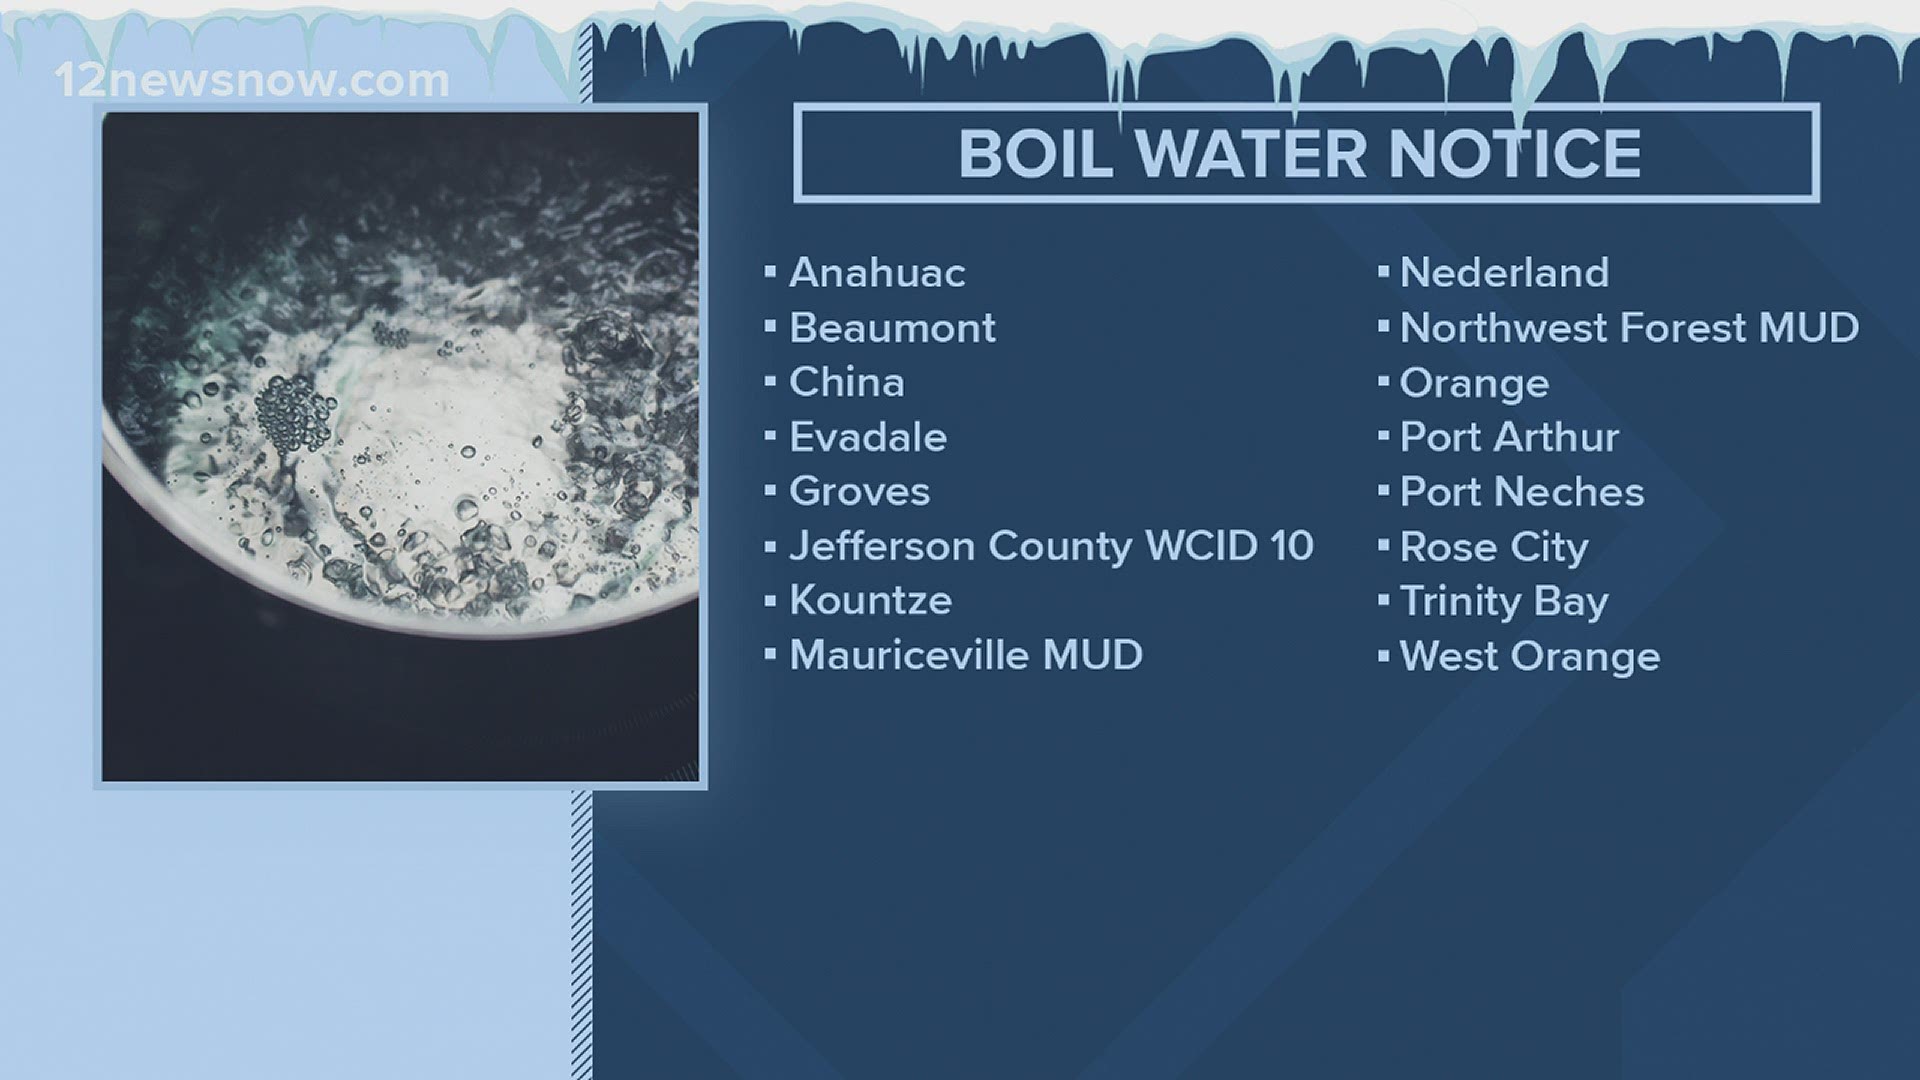 More than a dozen cities across Southeast Texas are having to boil water.